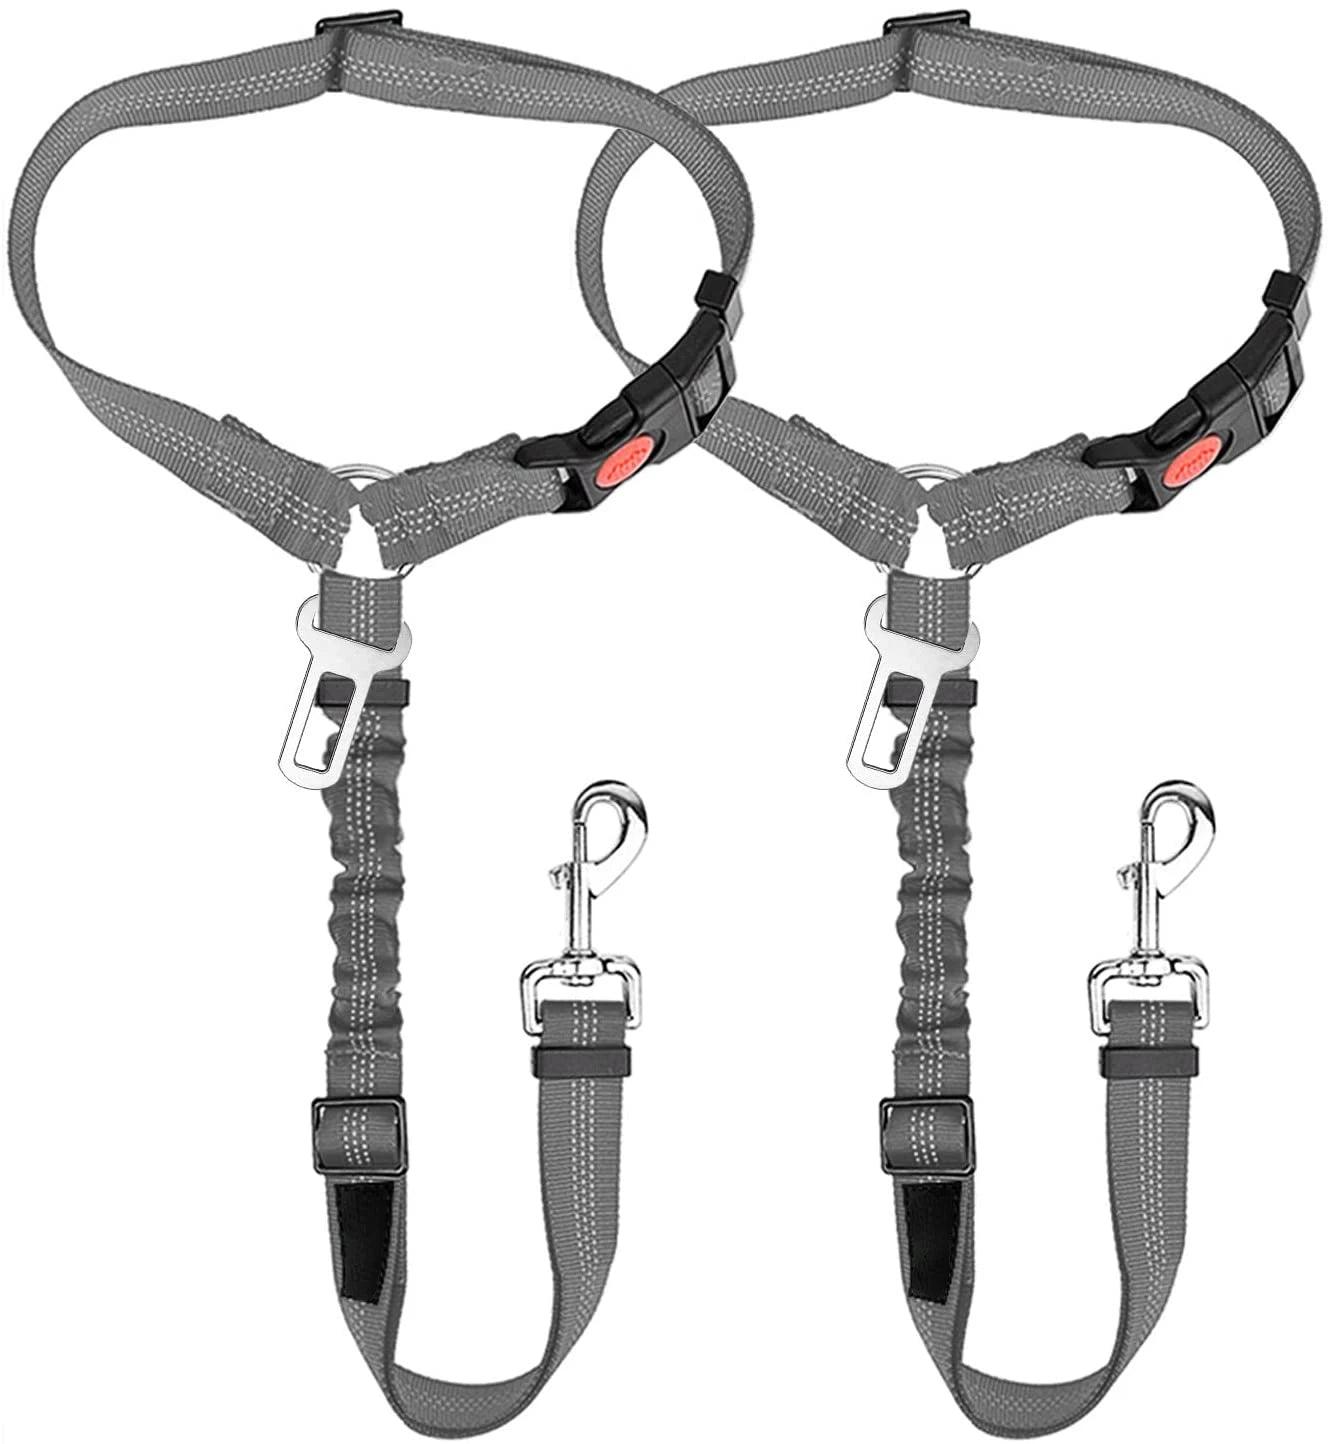 Dog Car Safety Harness with Adjustable Headrest Restraint and Elastic Bungee Buffer  ourlum.com   